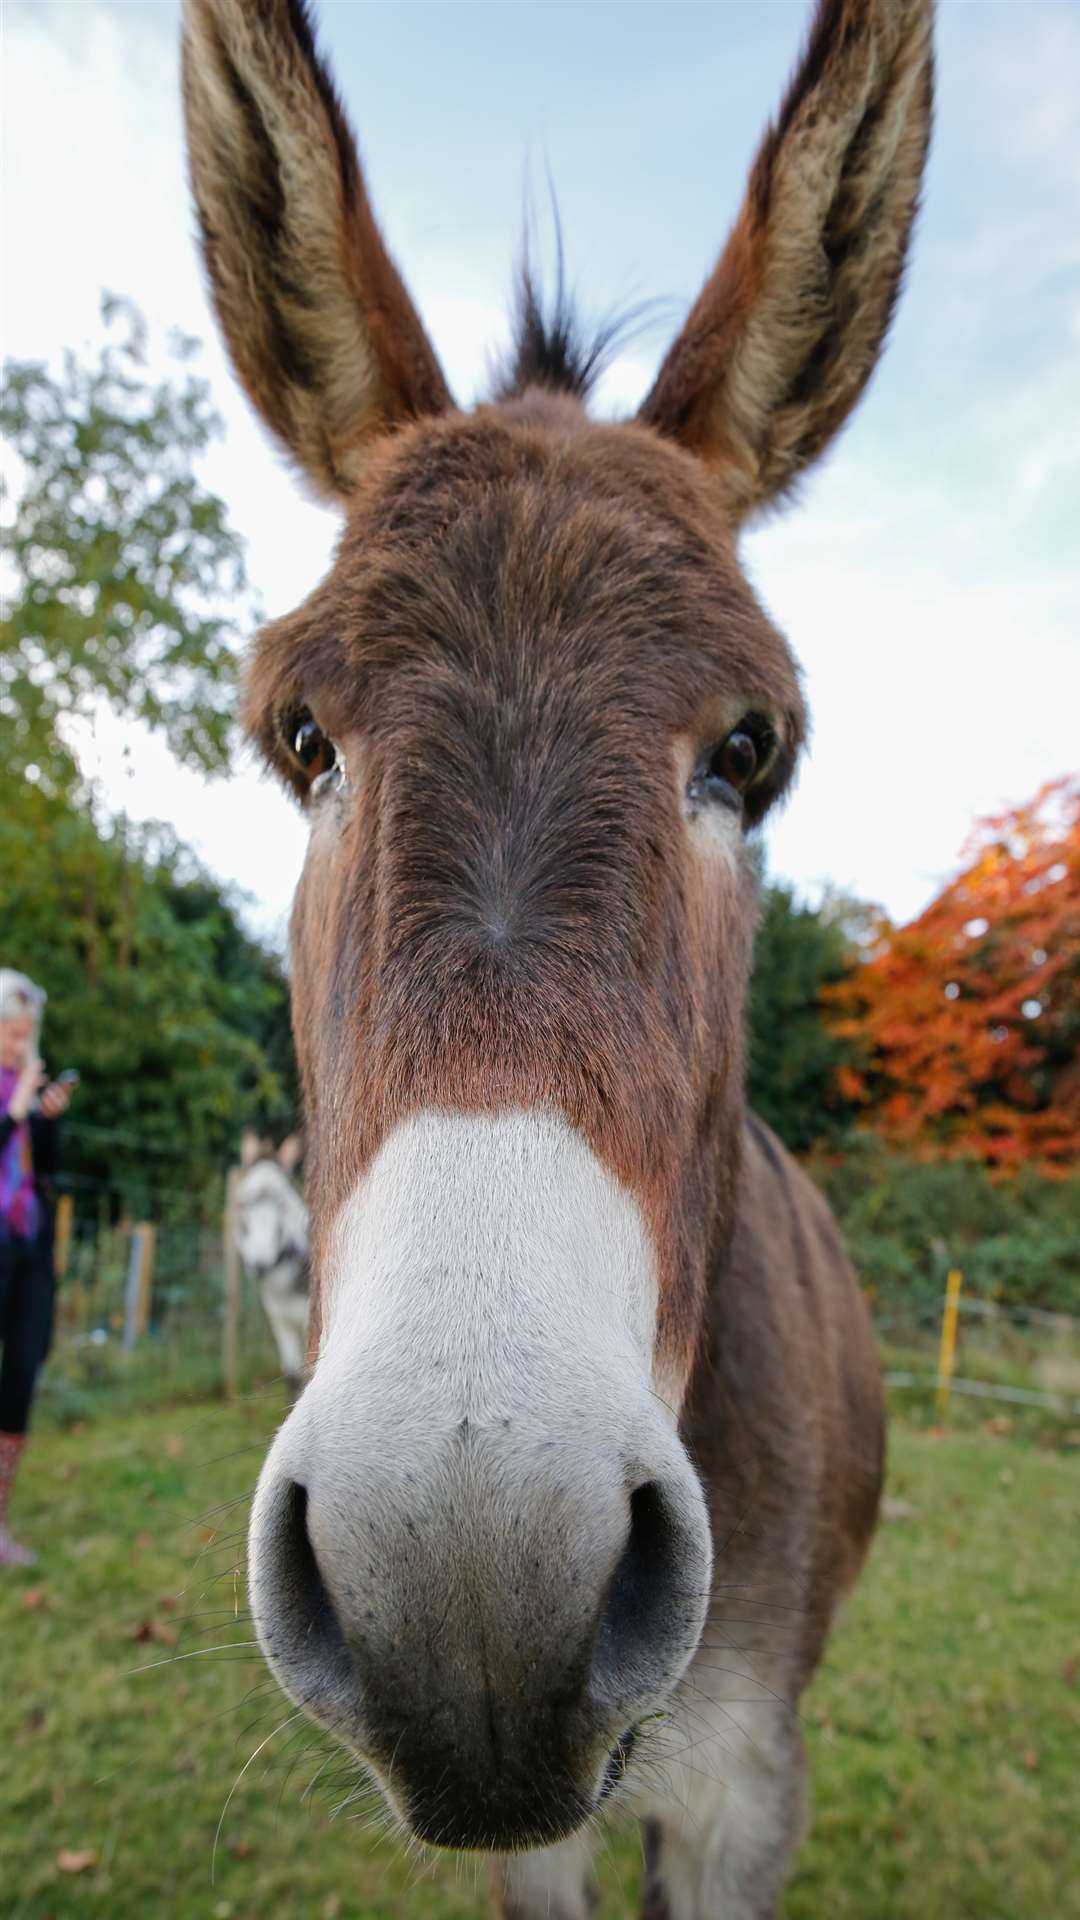 Woody the donkey has big ears for listening to the children. Picture: Matthew Walker